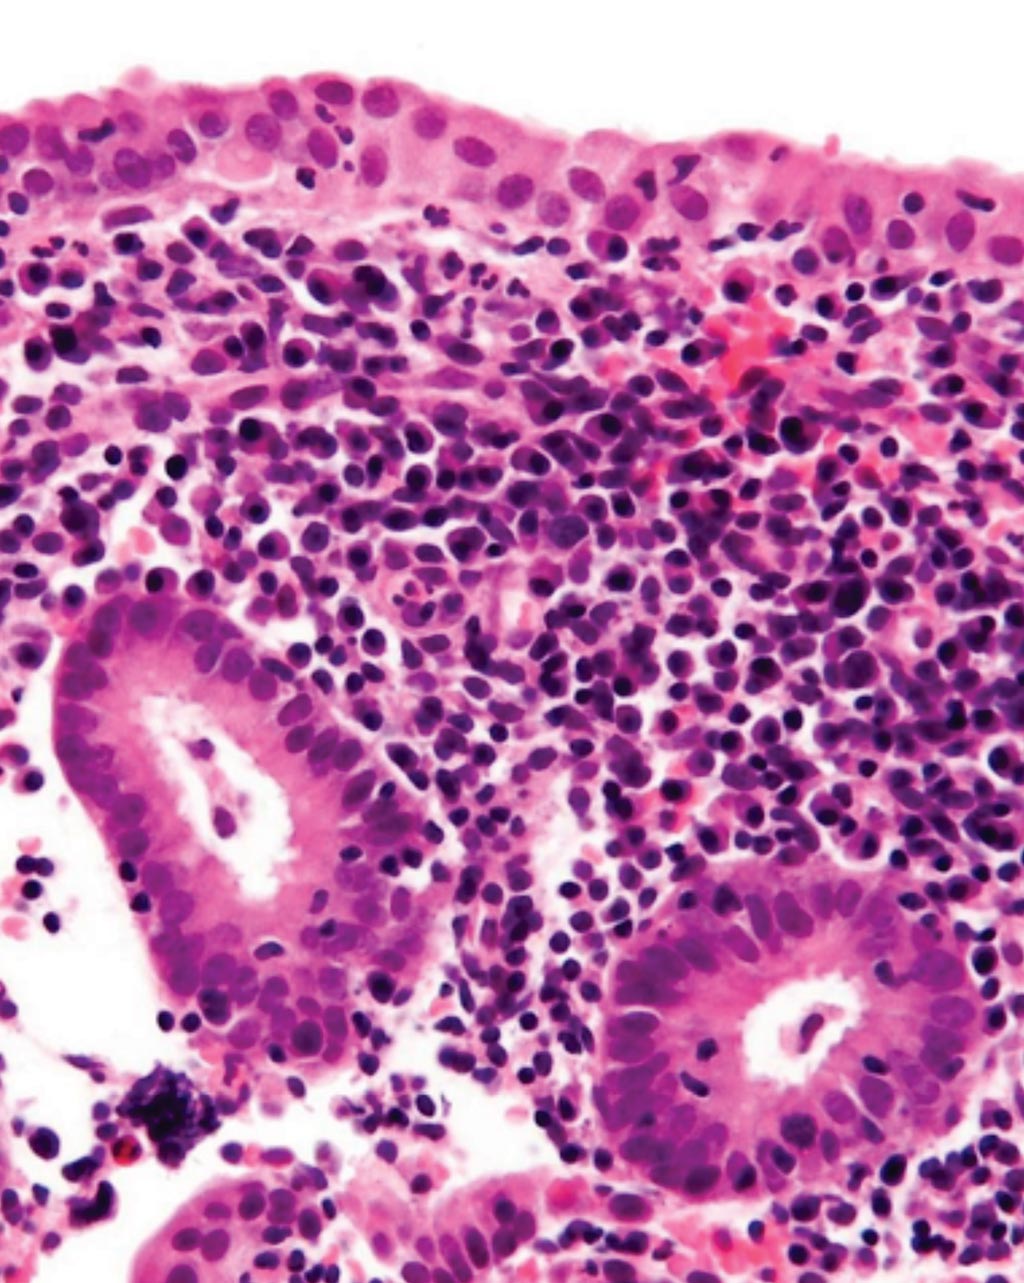 Image: A histological micrograph showing endometrium with abundant plasma cells, which are diagnostic for chronic endometritis and scattered neutrophils (Photo courtesy of Nephron).